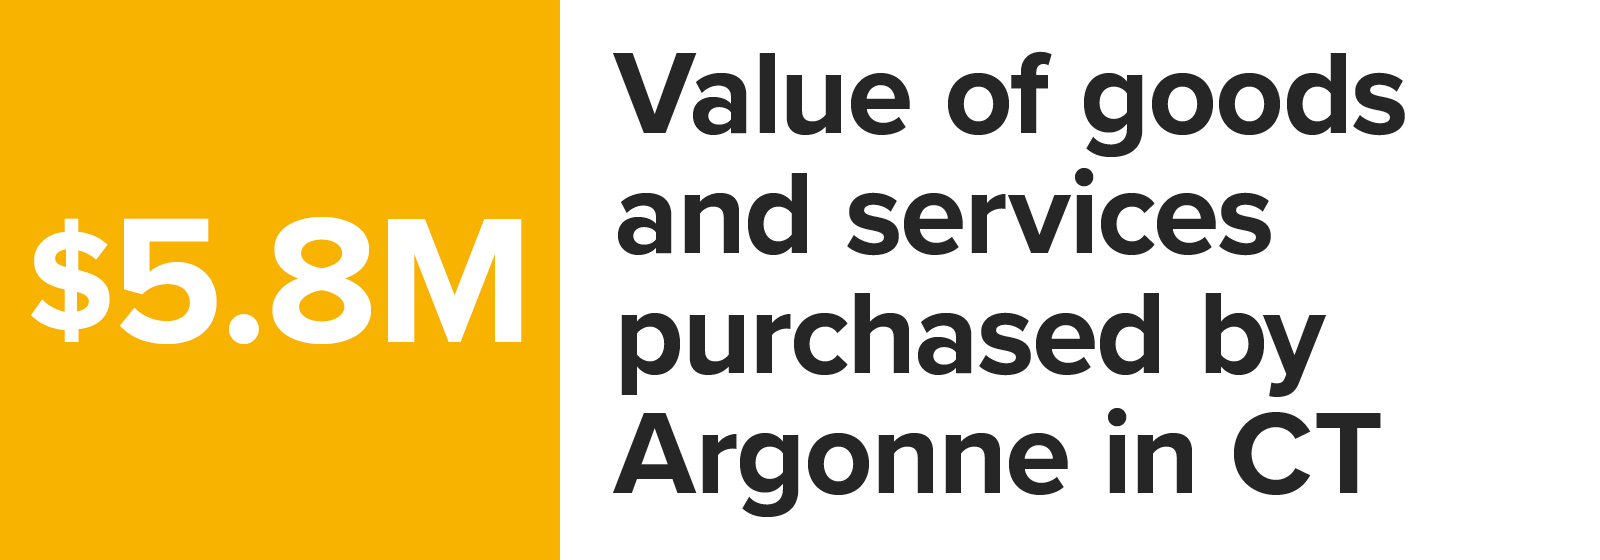 Number graphic value of goods and services purchased by Argonne in Connecticut